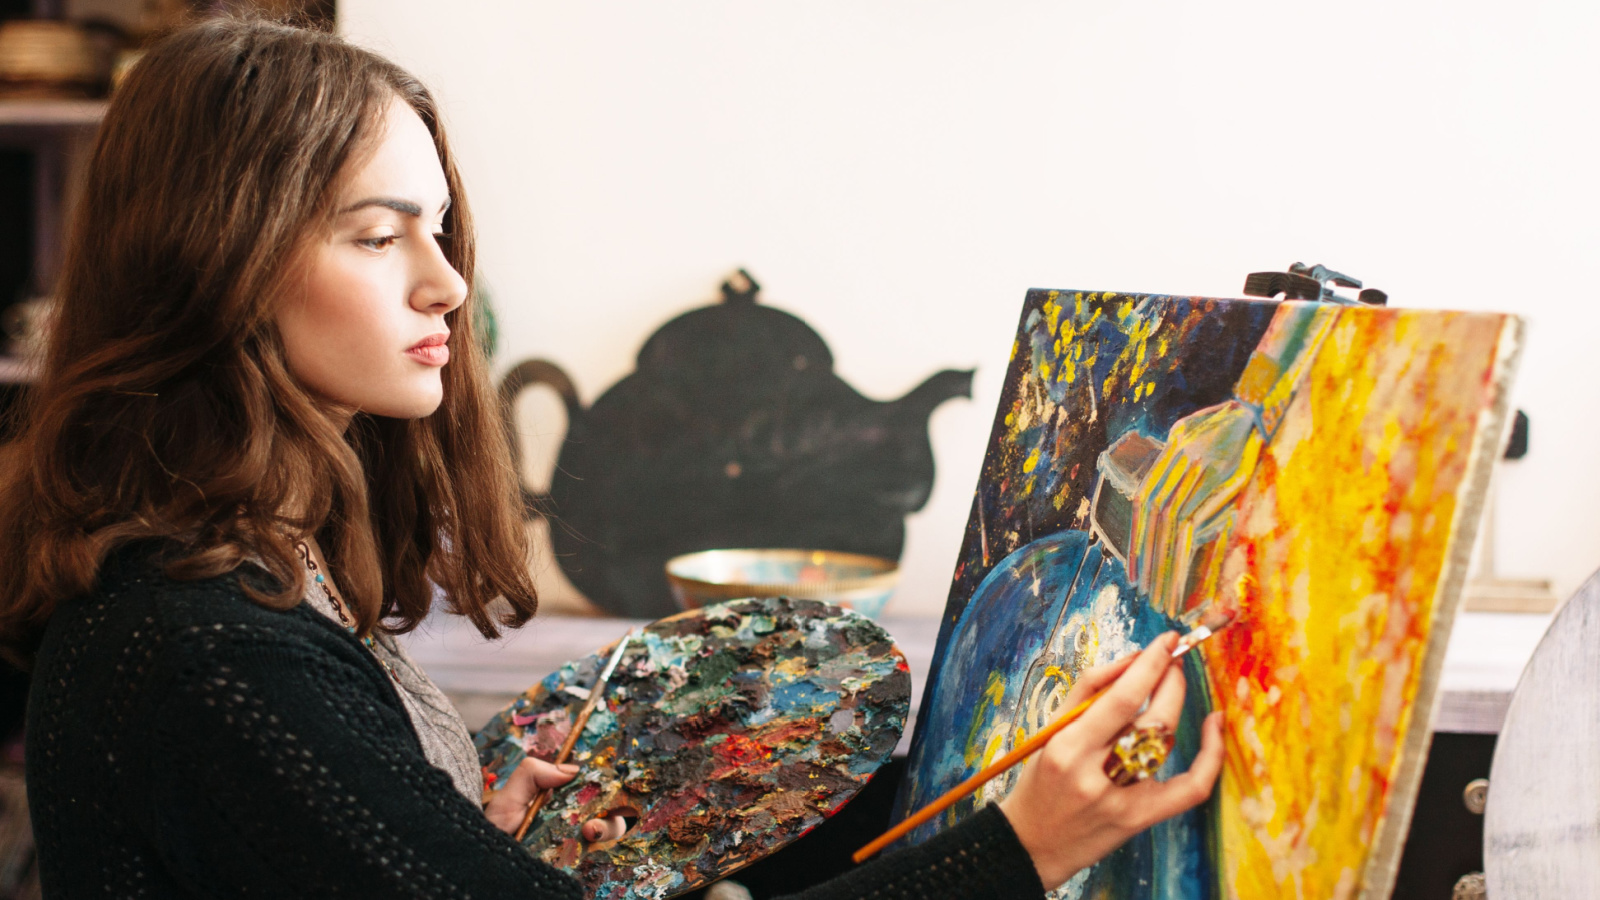 image credit: Golubovy/Shutterstock <p><span>Engaging in hobbies outside of work can provide a much-needed mental break. Whether it’s painting, gardening, or playing a musical instrument, hobbies can be therapeutic and offer a creative outlet. “My weekend pottery classes are my escape from the weekly grind,” a community forum enthusiast shares.</span></p>